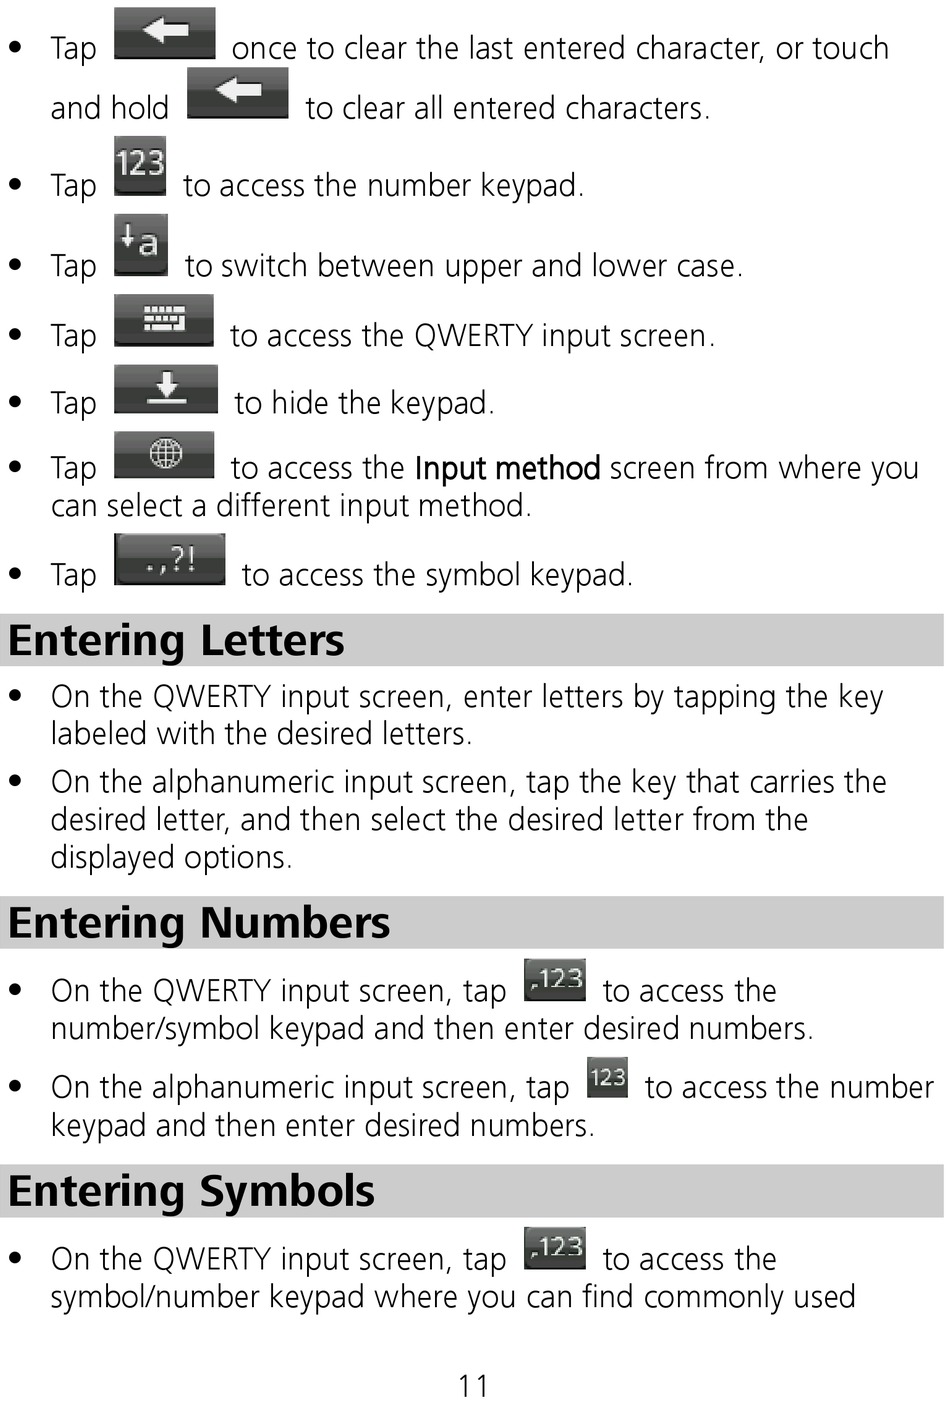 how to enter letters on phone keypad android